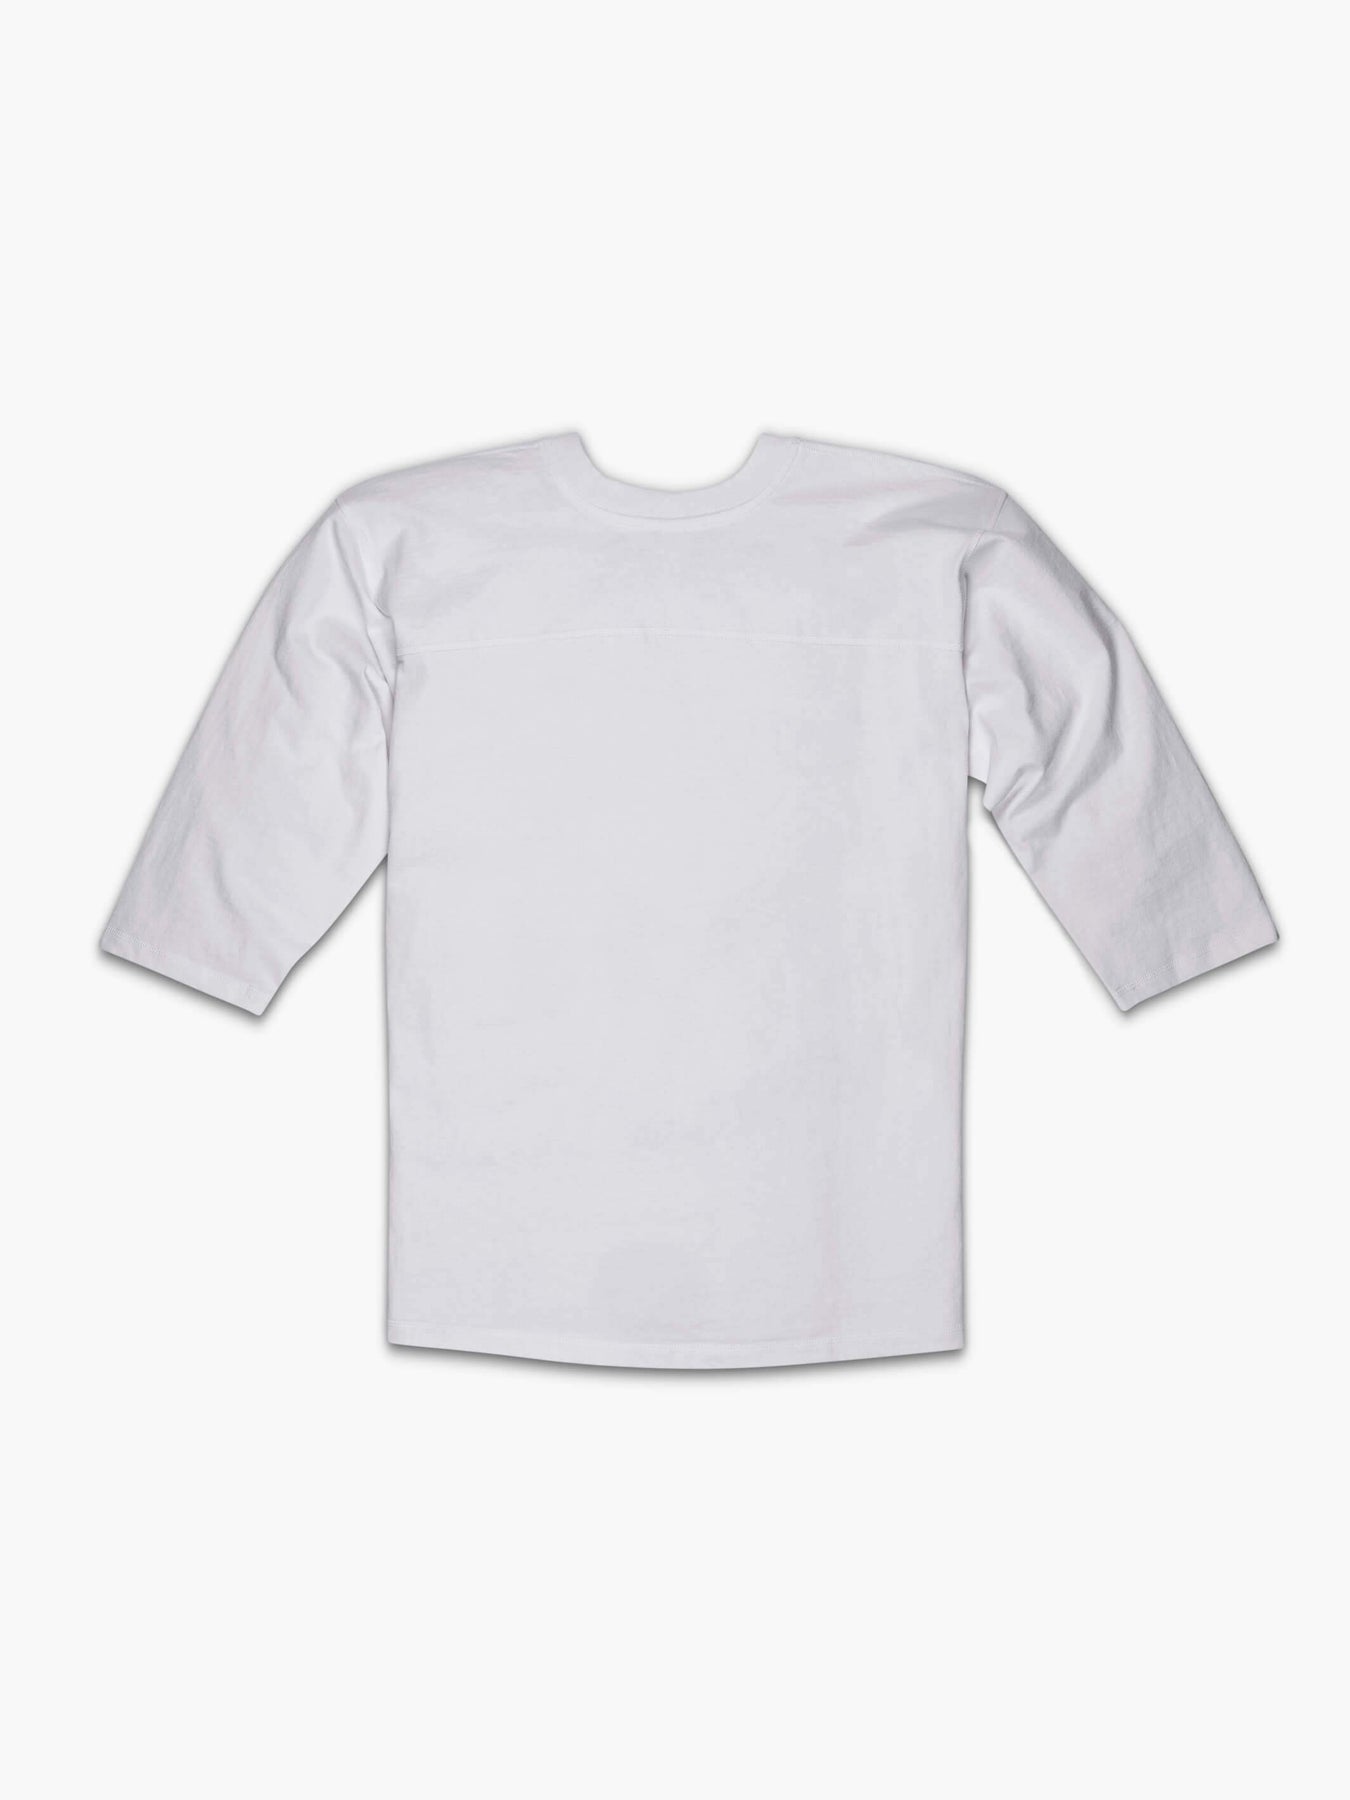 Super Warm Thermal Inner Cotton shirt For Winter [ off white ] – Royal Cart